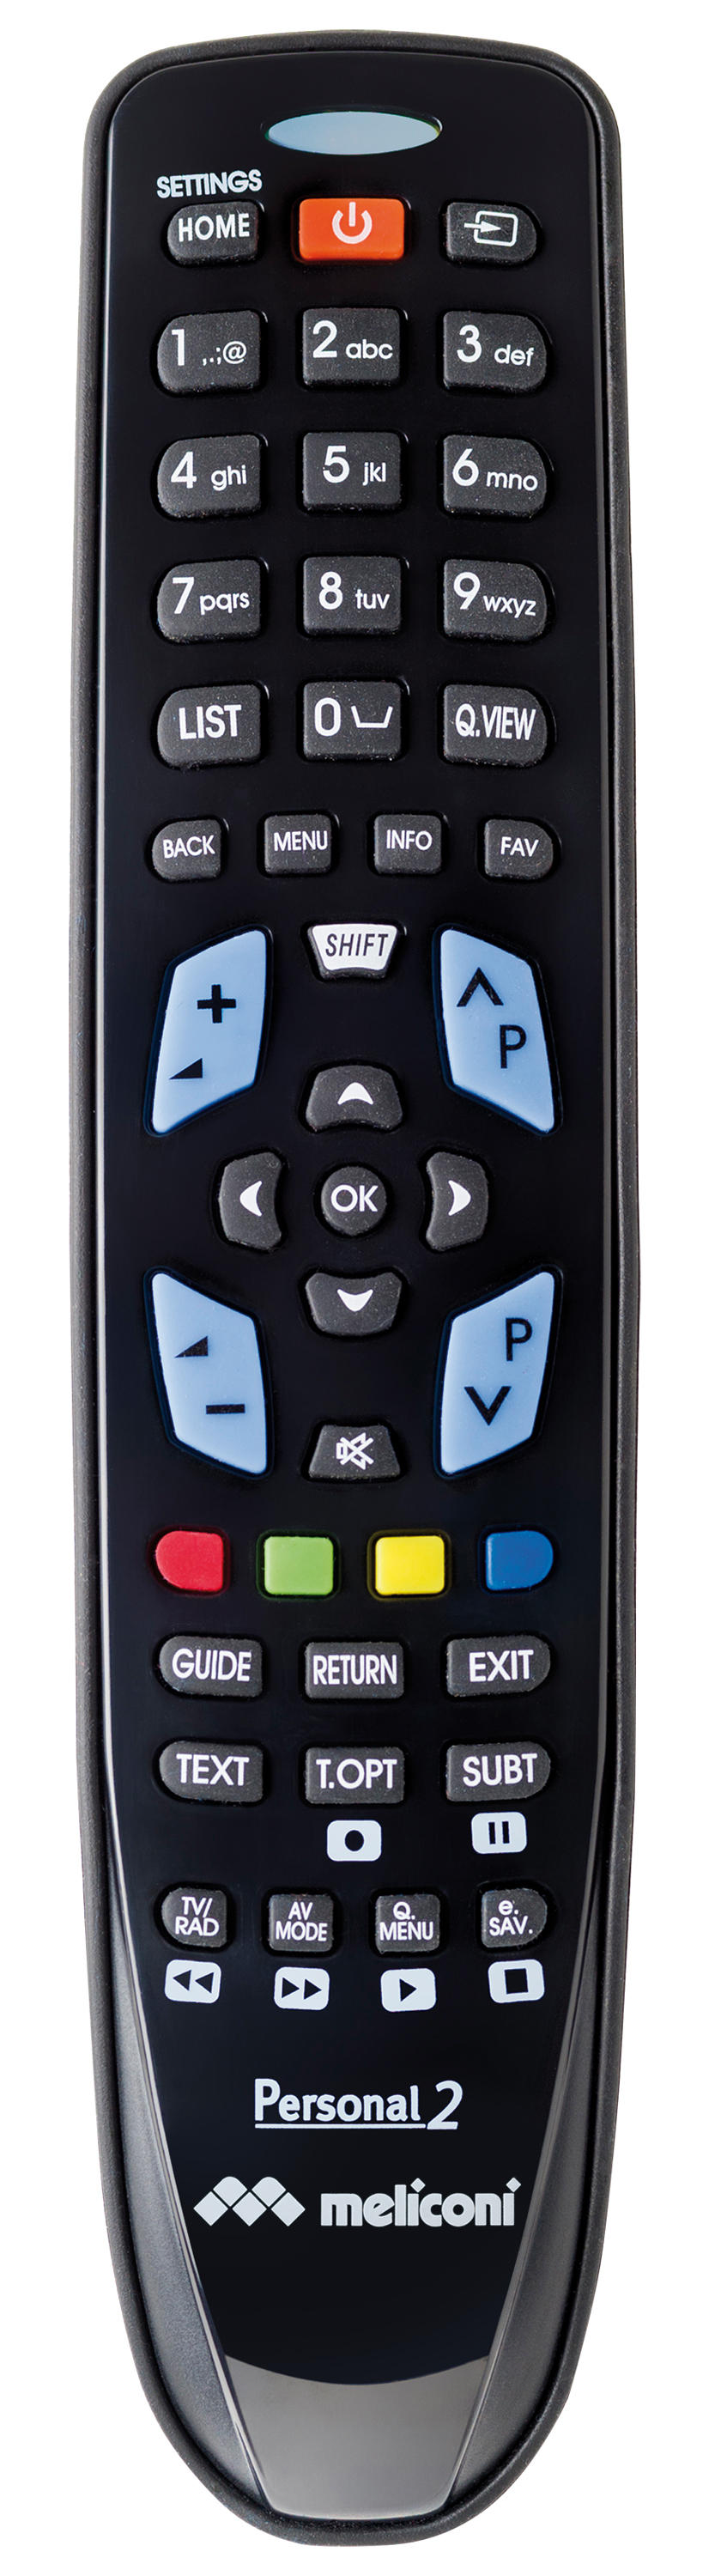 Gumbody personal 2, universal remote control LG tv ready to use rubber body, black